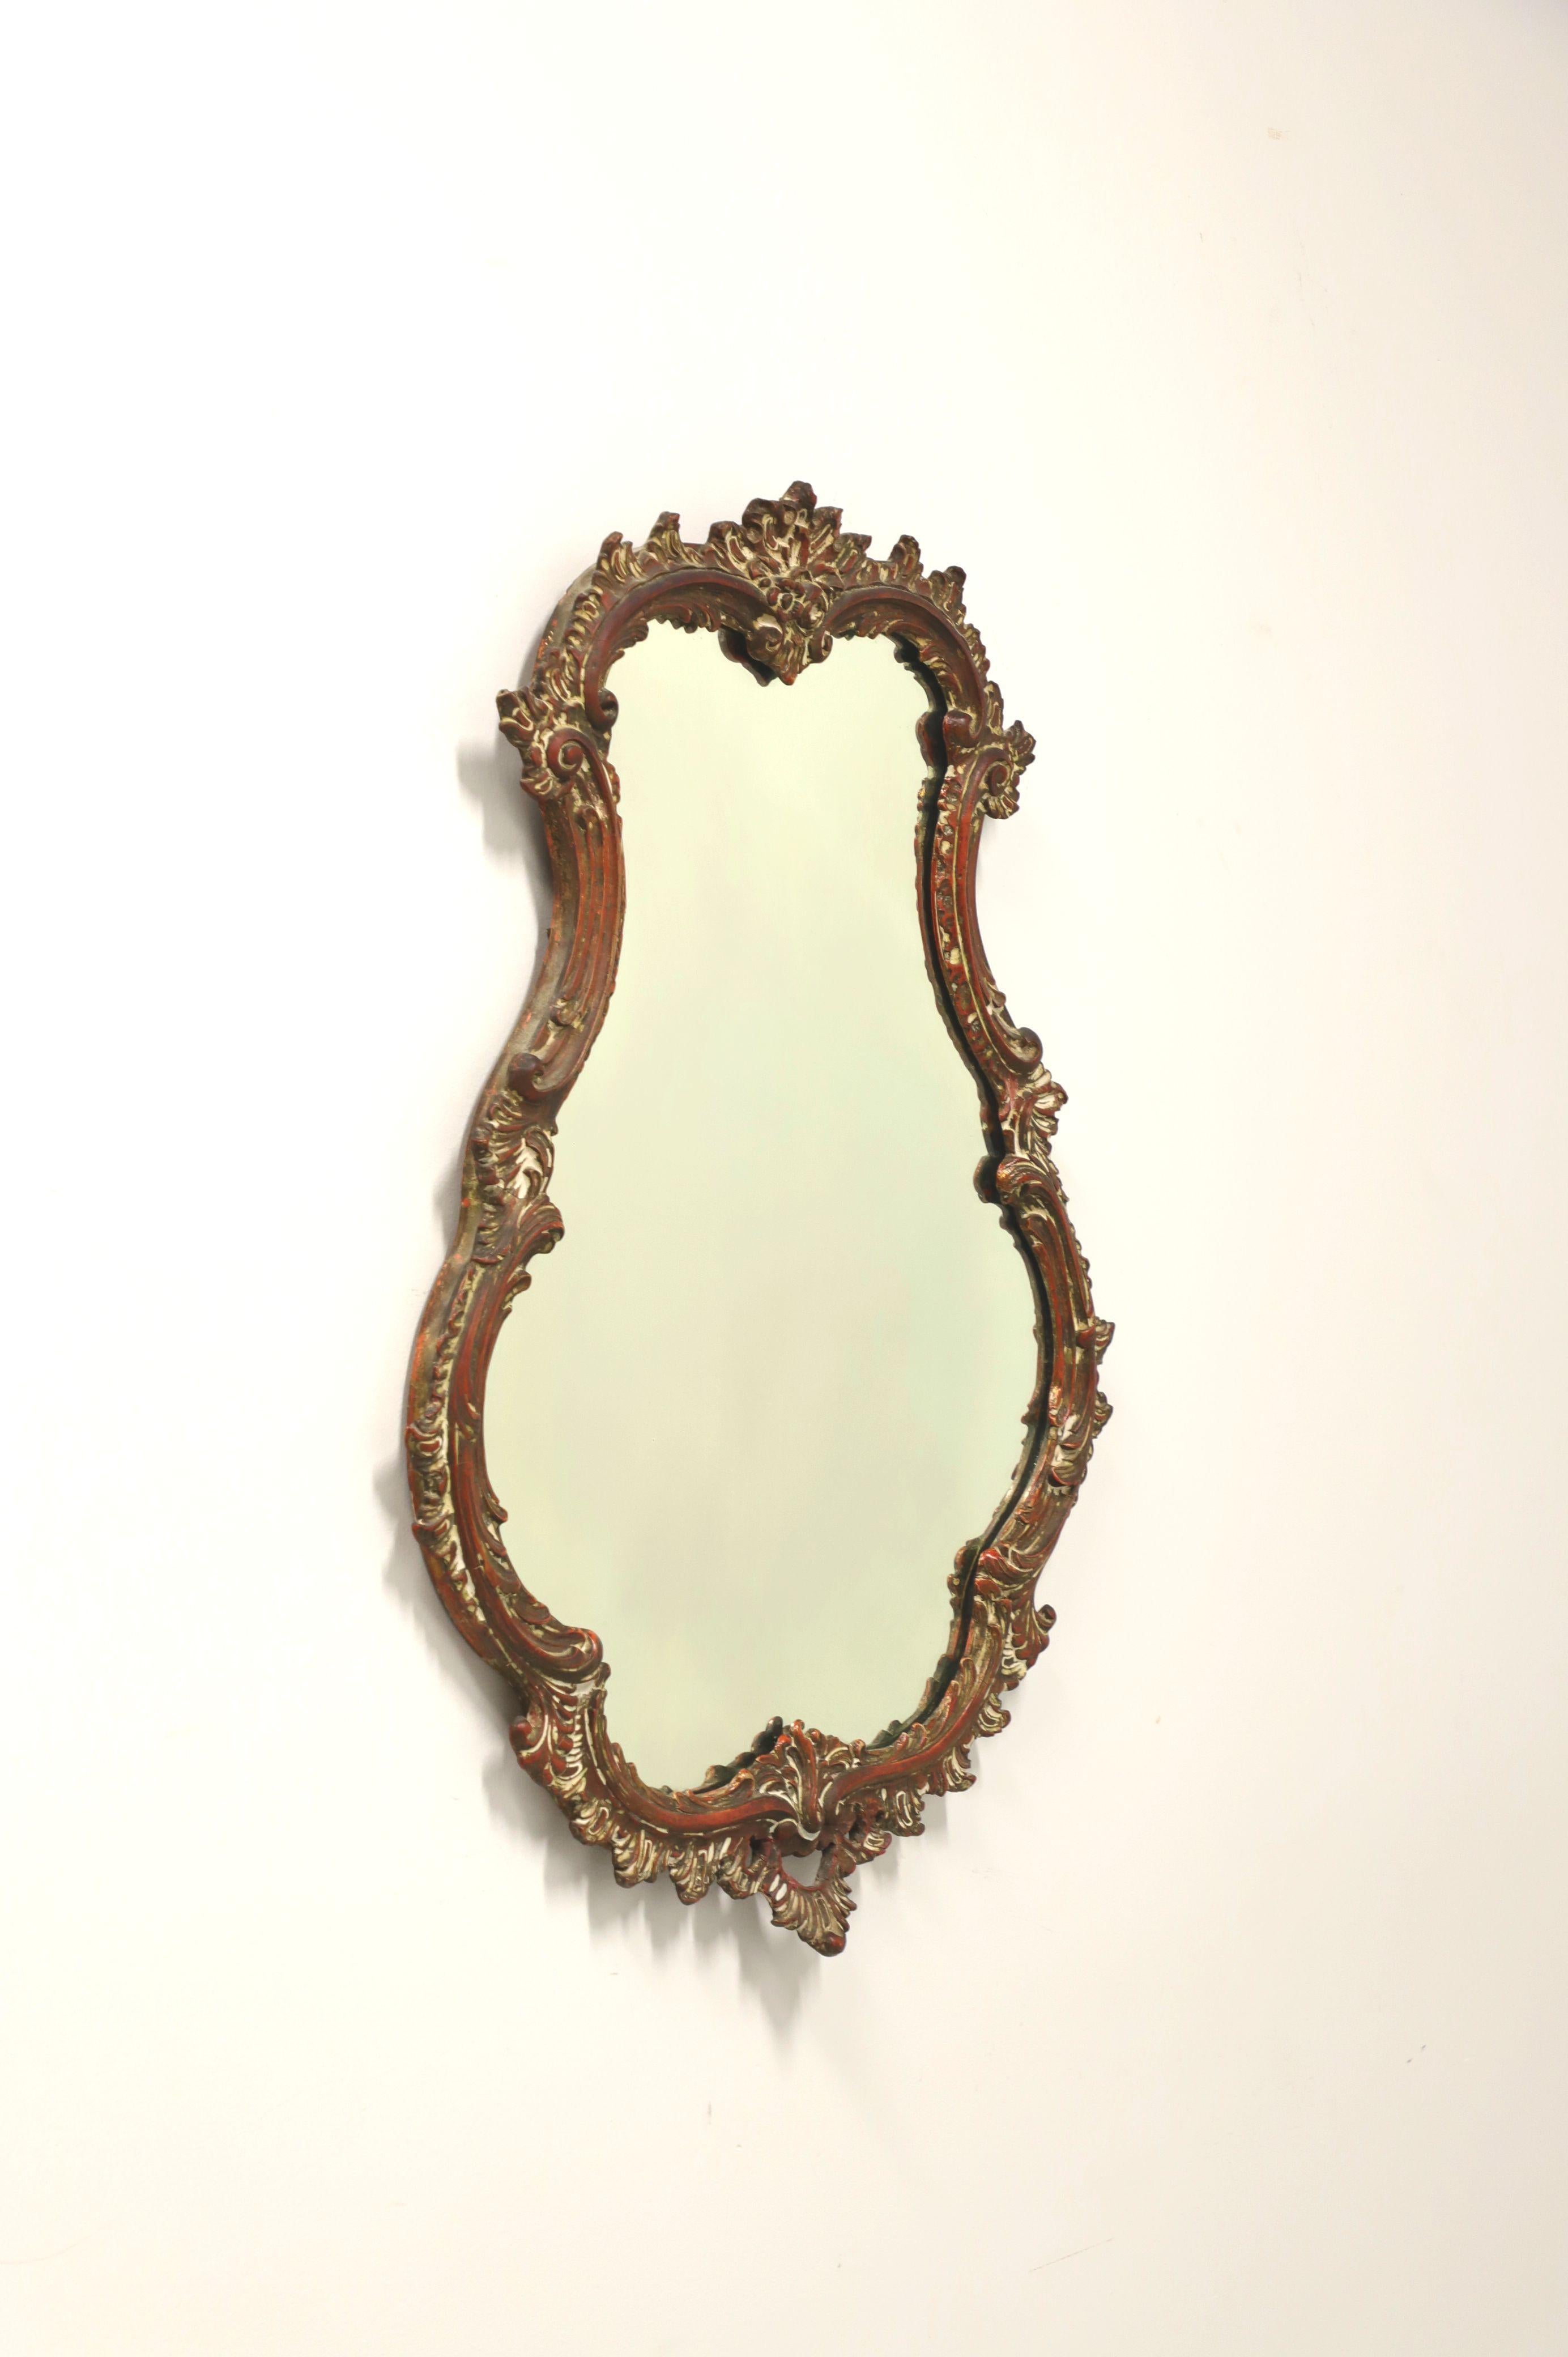 An antique French style wall mirror, unbranded. Mirrored glass and wood frame painted gold, with shades of red & white. Features an ornately carved frame with a decorative motif. Possibly made in USA, in the late 19th Century. 

Measures: 26.5 W